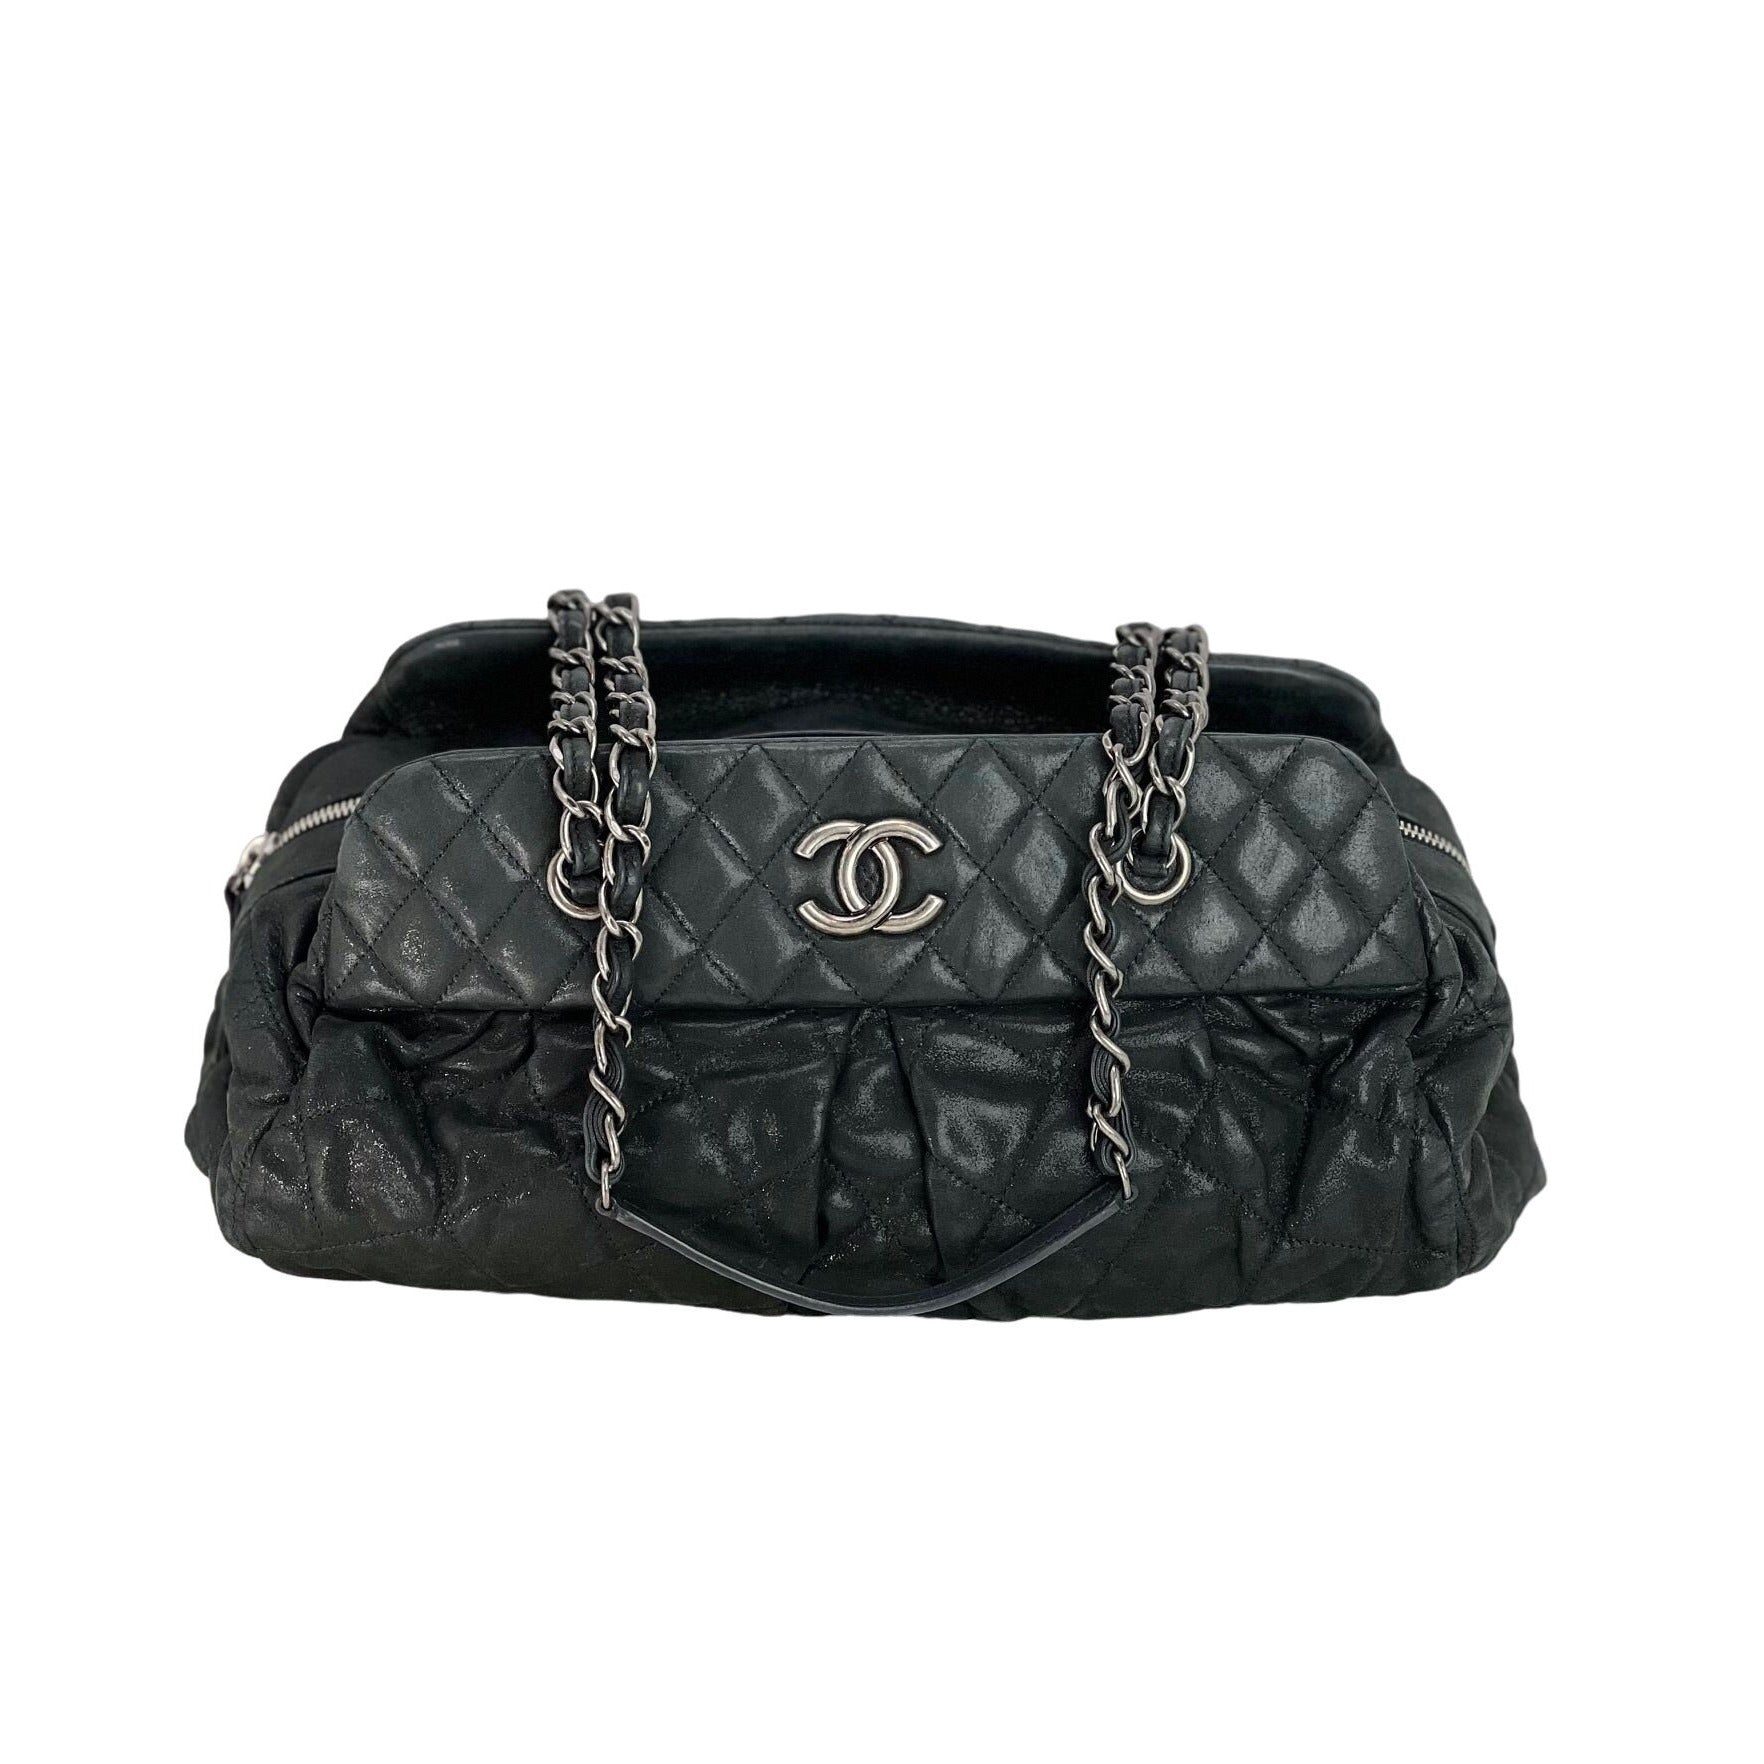 CHANEL Chanel Iridescent Calfskin Quilted CC Tote Black, gmayer1